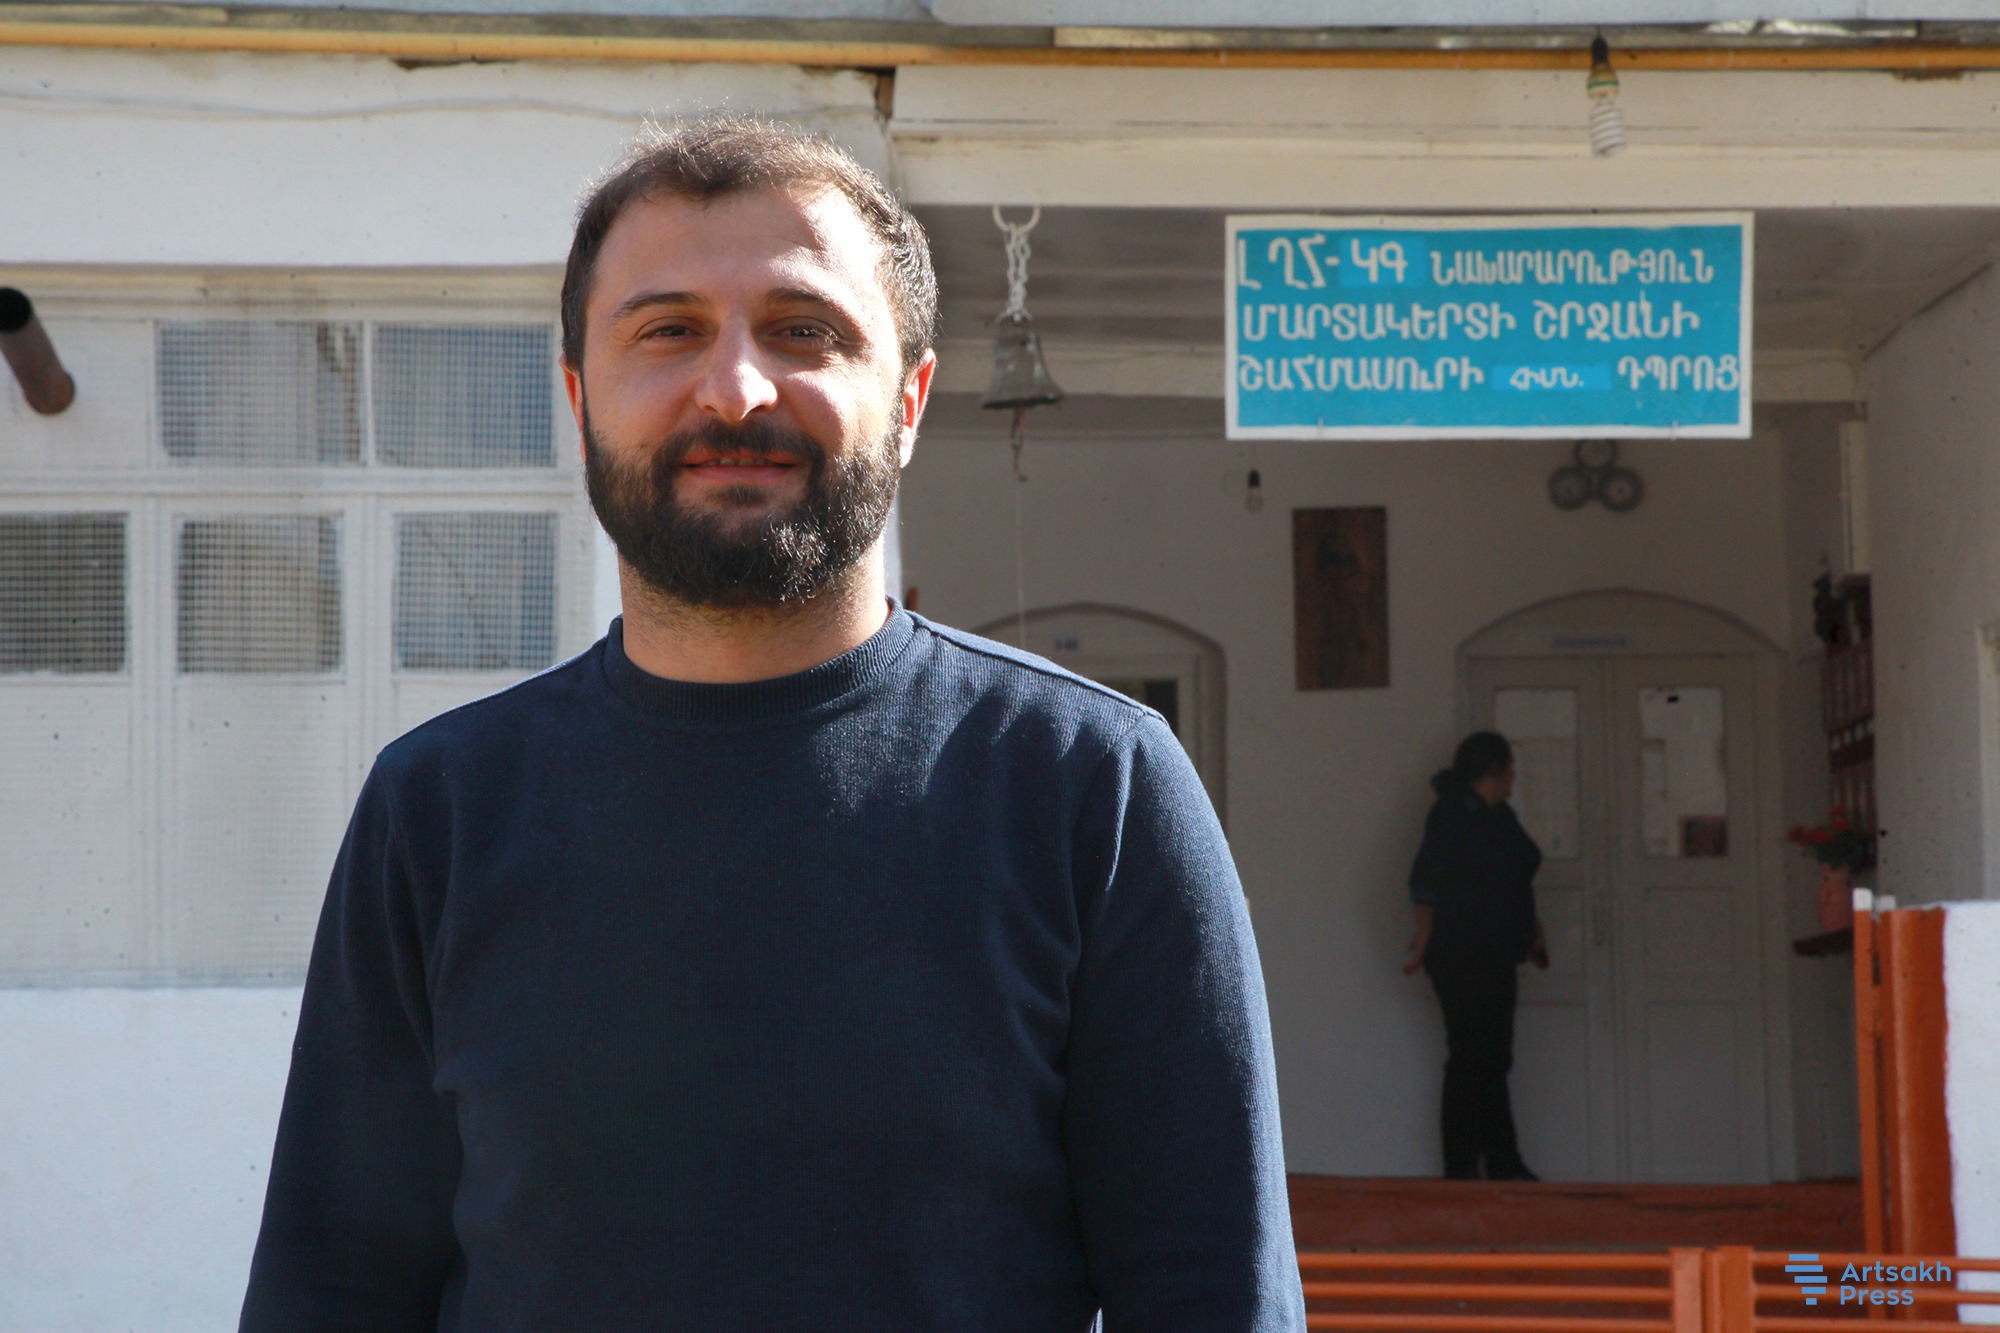 All the children of Artsakh have a great potential. Teacher of “Teach for Armenia” program